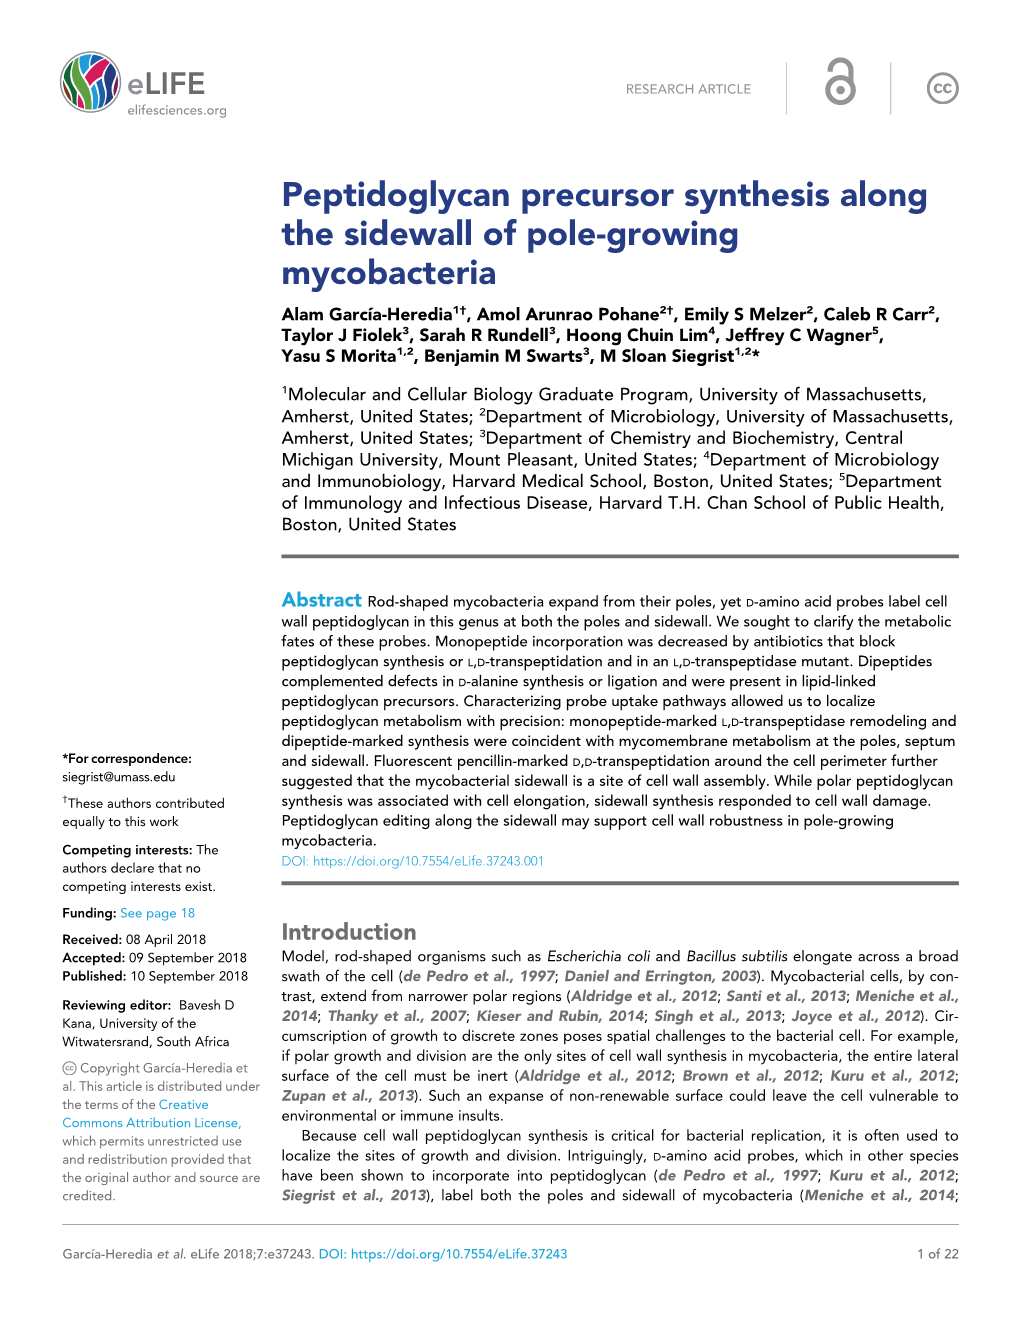 Peptidoglycan Precursor Synthesis Along the Sidewall of Pole-Growing Mycobacteria